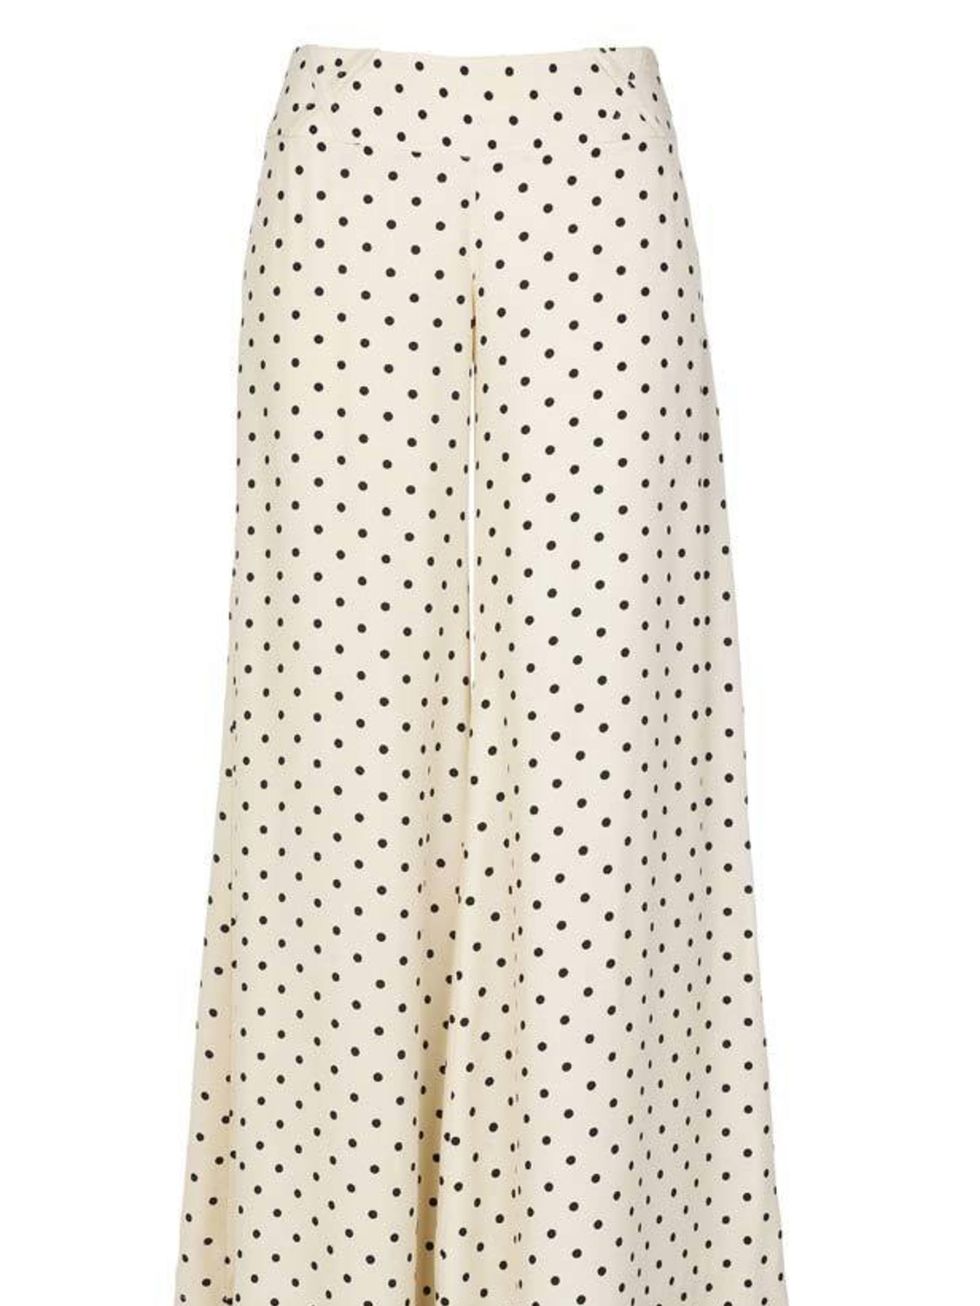 <p>Palazzo pants are rivalling flared jeans for the most on-trend trouser shape of the season so get in on the act early with this pretty printed pair <a href="http://www.riverisland.com/Online/women/trousers--leggings/smart-trousers/cream-polka-dot-pala